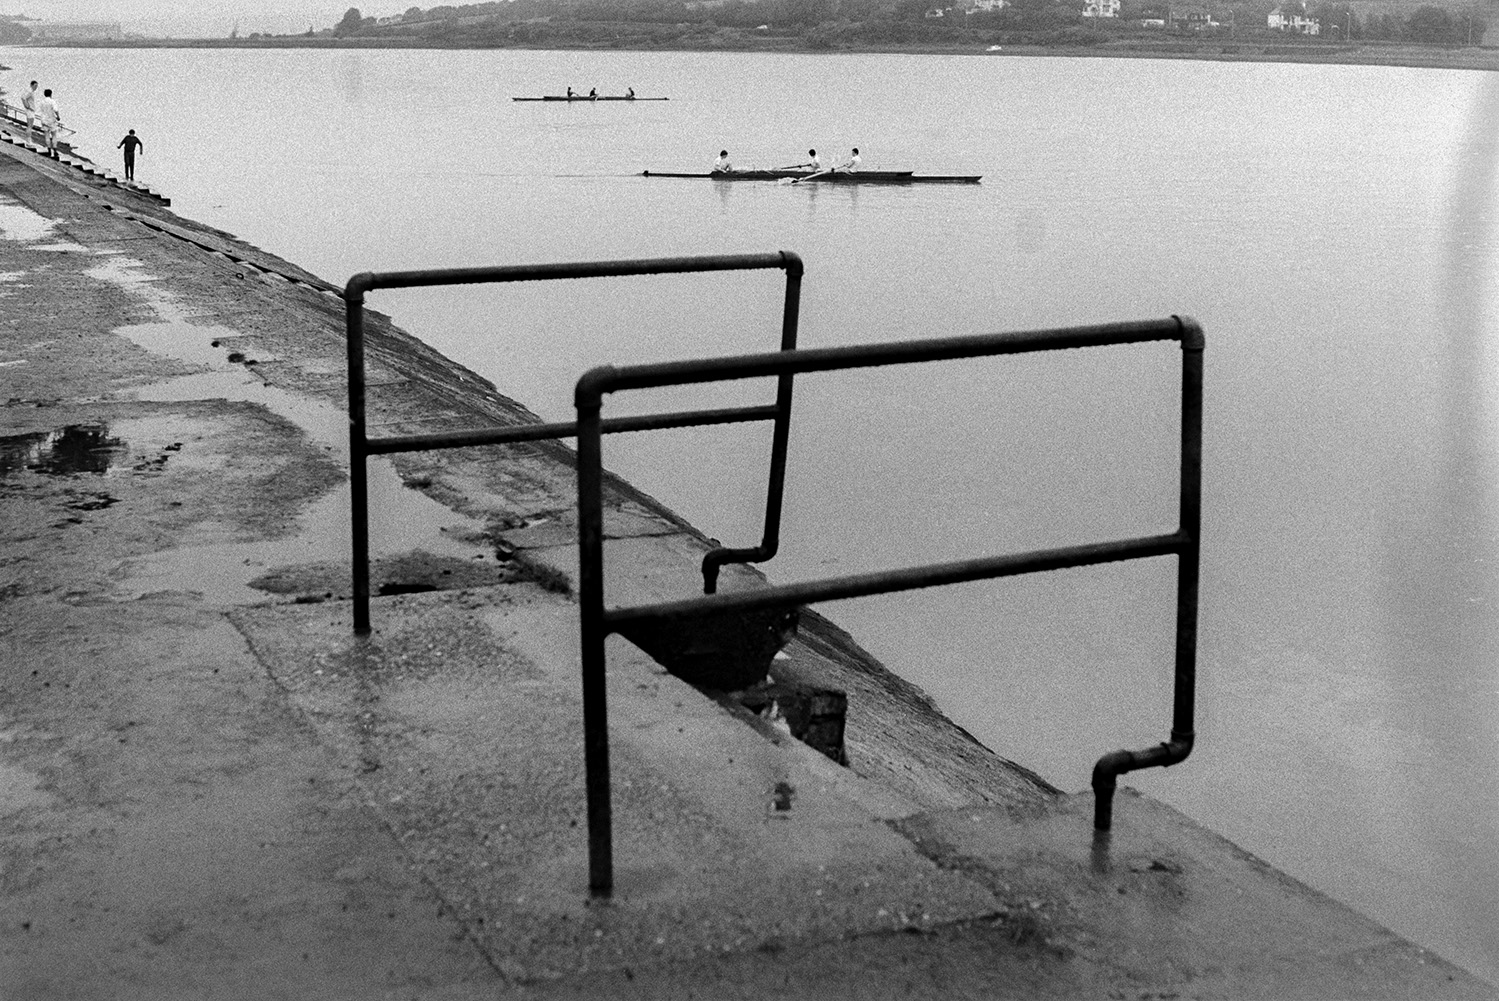 Railings by steps down a concrete bank to the River Torridge at Bideford. Rowers can be seen on the river and North Gate is visible on the other side of the river. The railings were later removed.